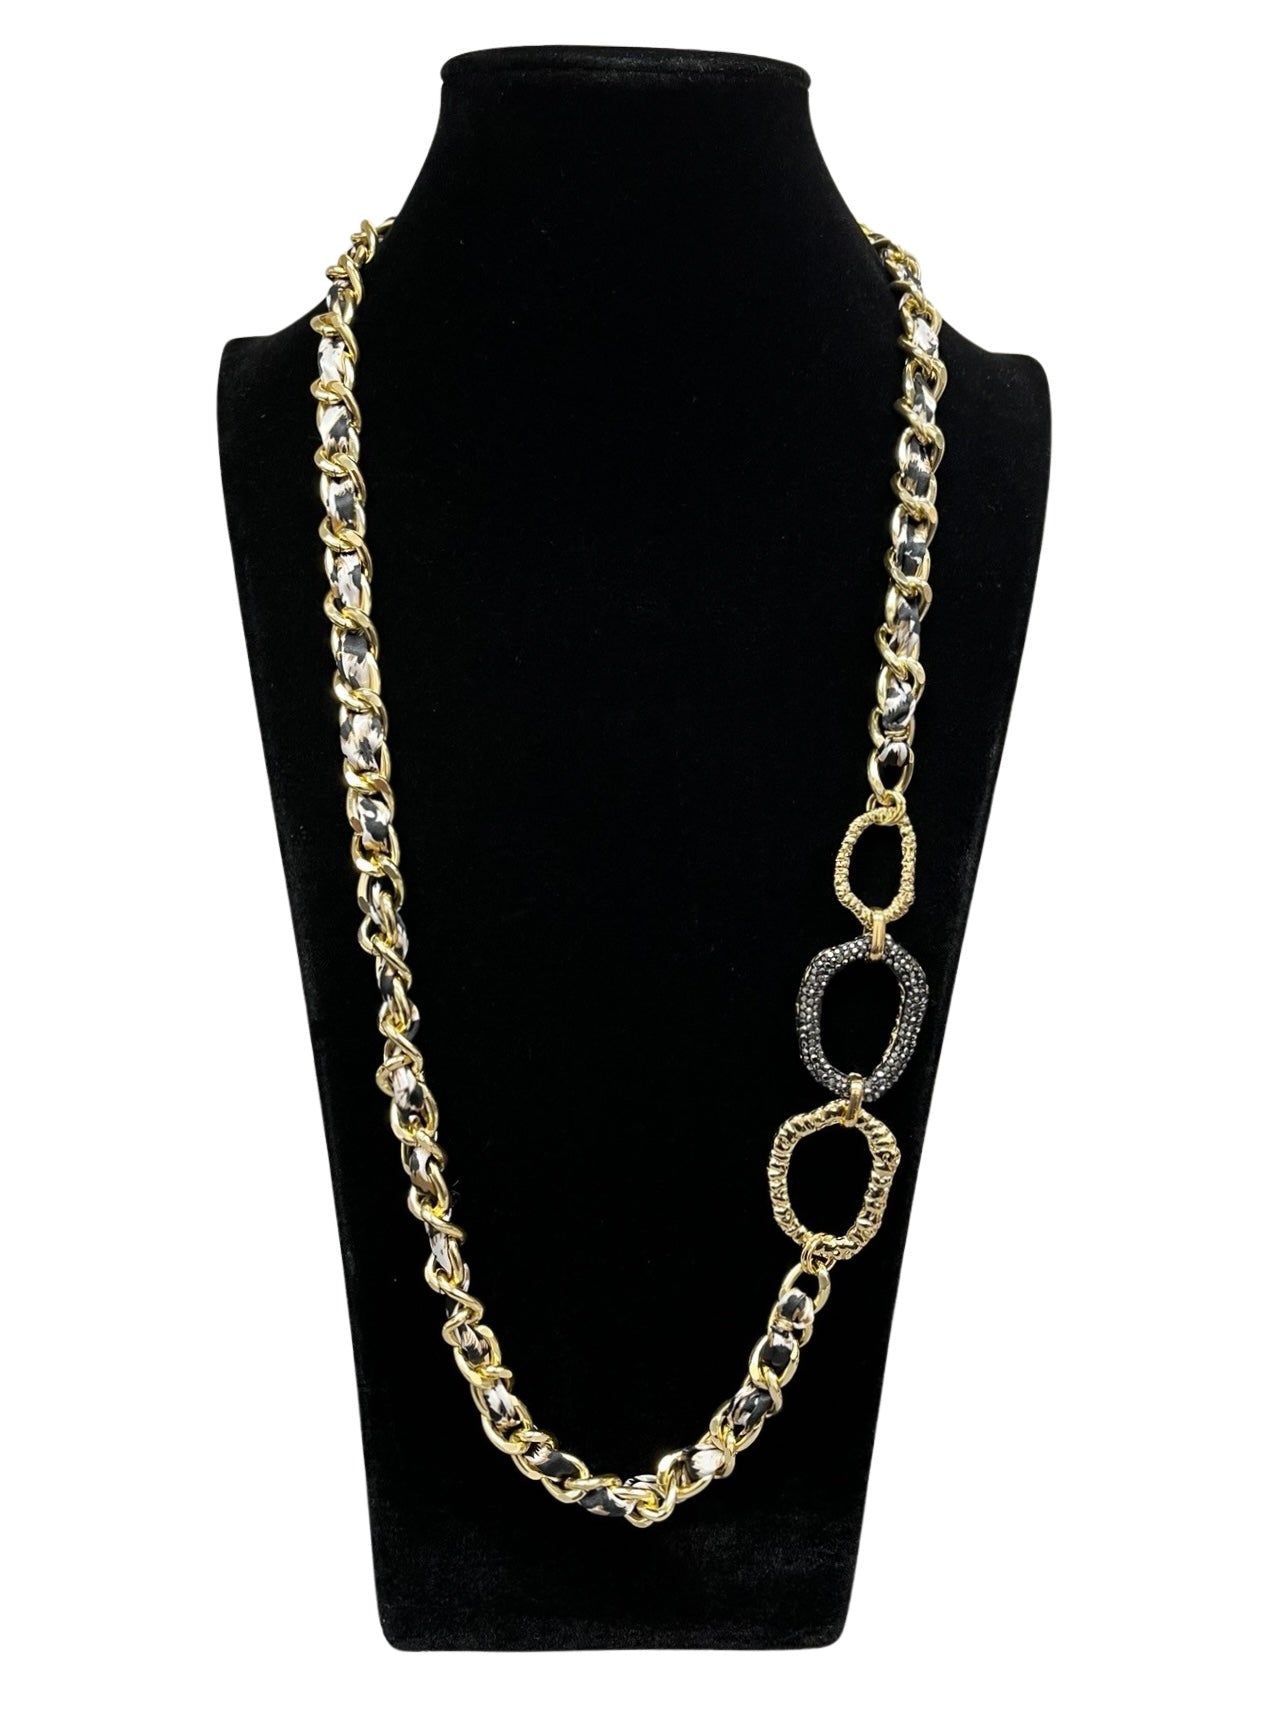 Gold & Animal Print Long Statement Necklace